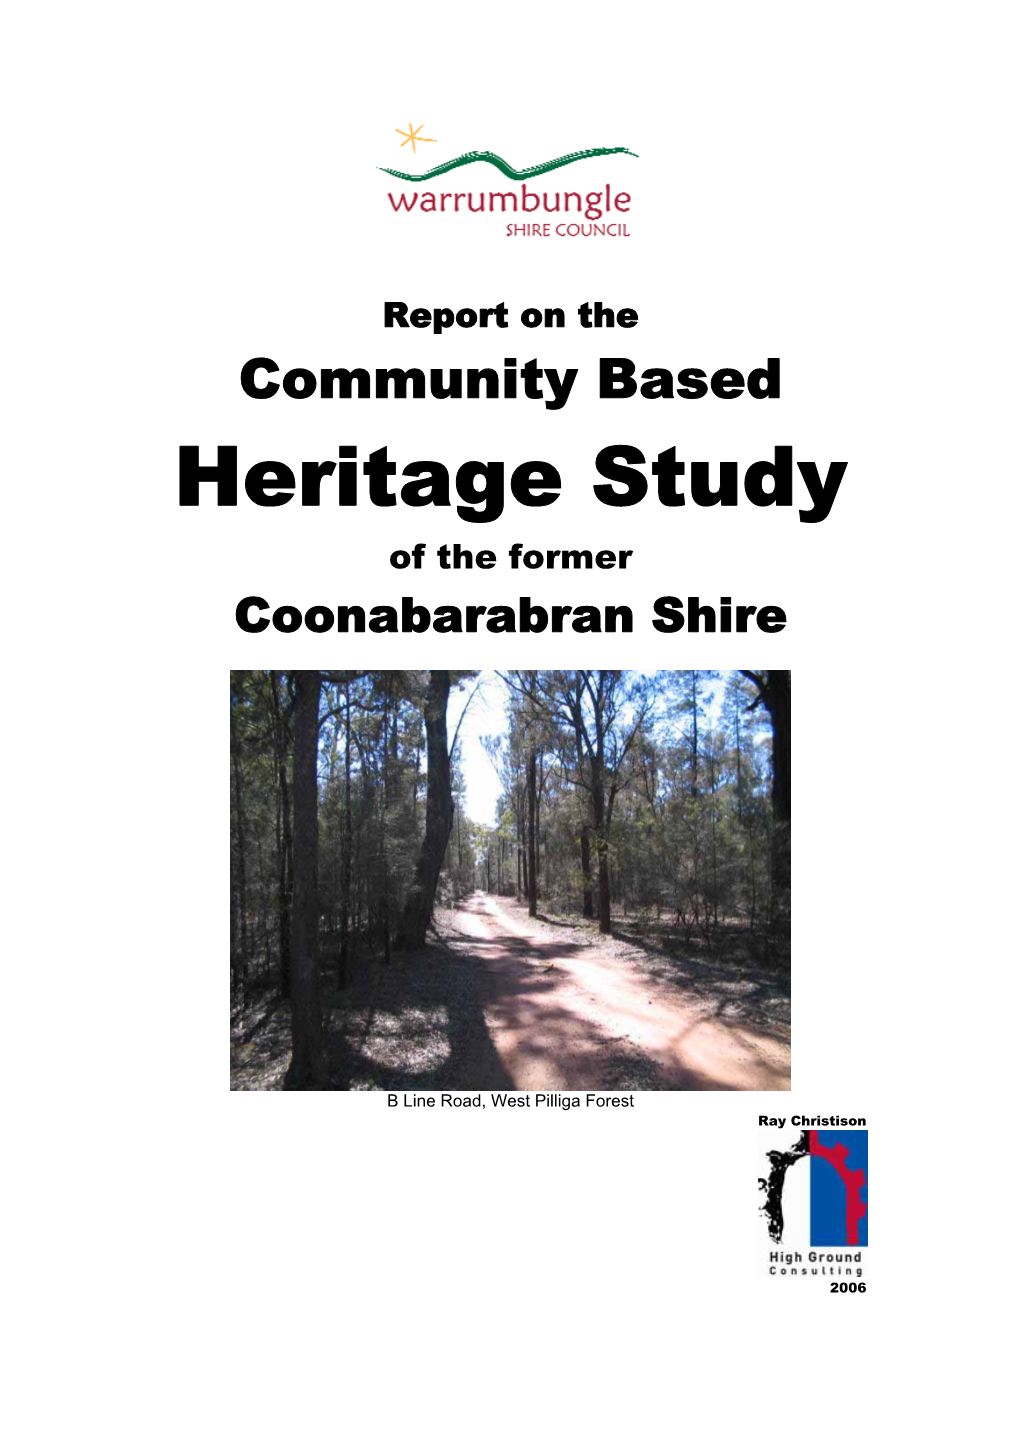 Heritage Study of the Former Coonabarabran Shire